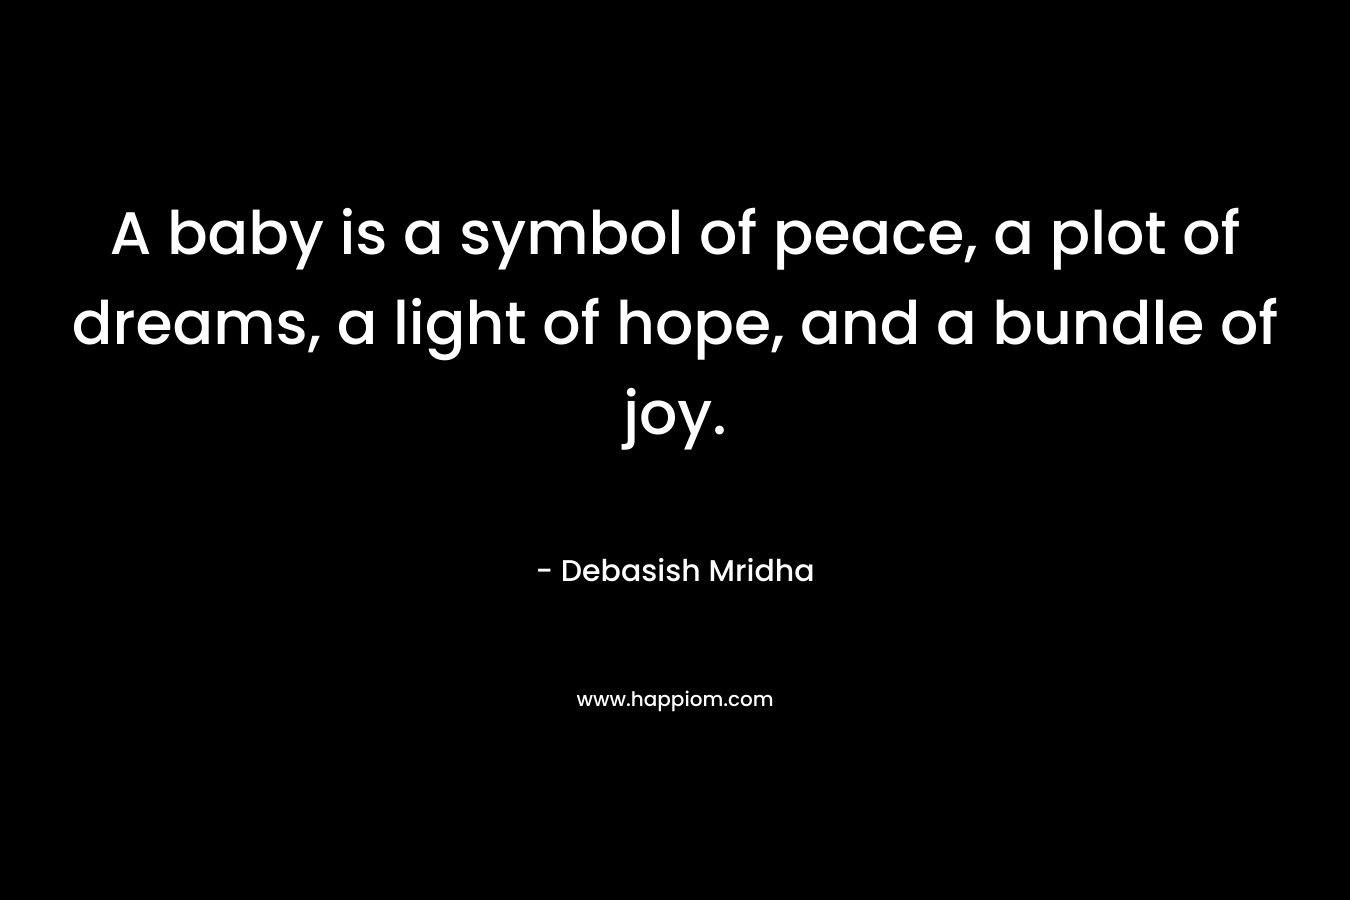 A baby is a symbol of peace, a plot of dreams, a light of hope, and a bundle of joy.